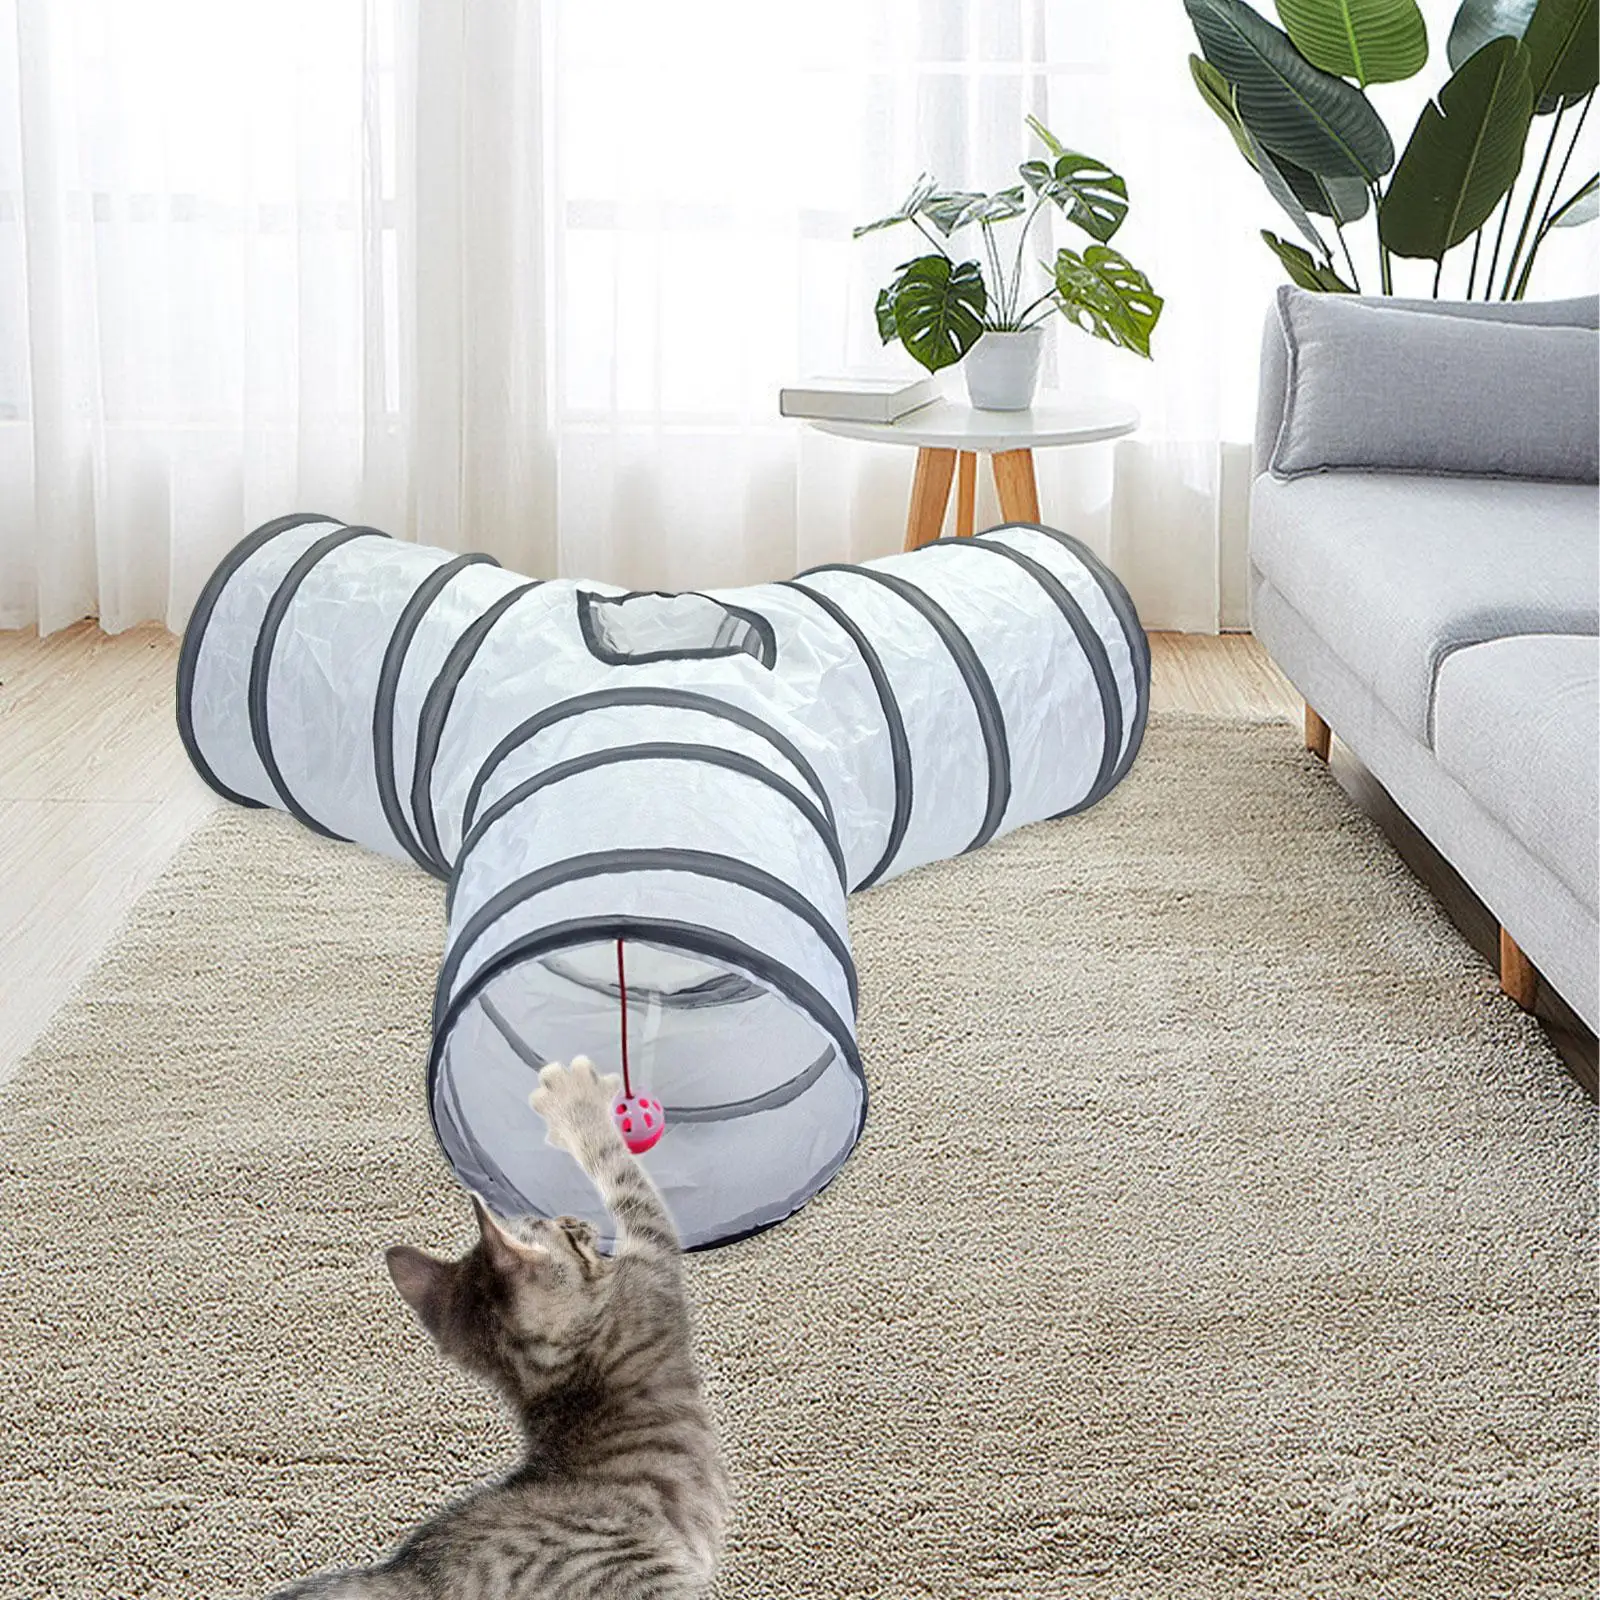 Collapsible Cat Tunnel Tube Tear Resistant Cat Toys Foldable Pets Tube for Guinea Pig Cats Ferrets Puppy Indoor Exercising